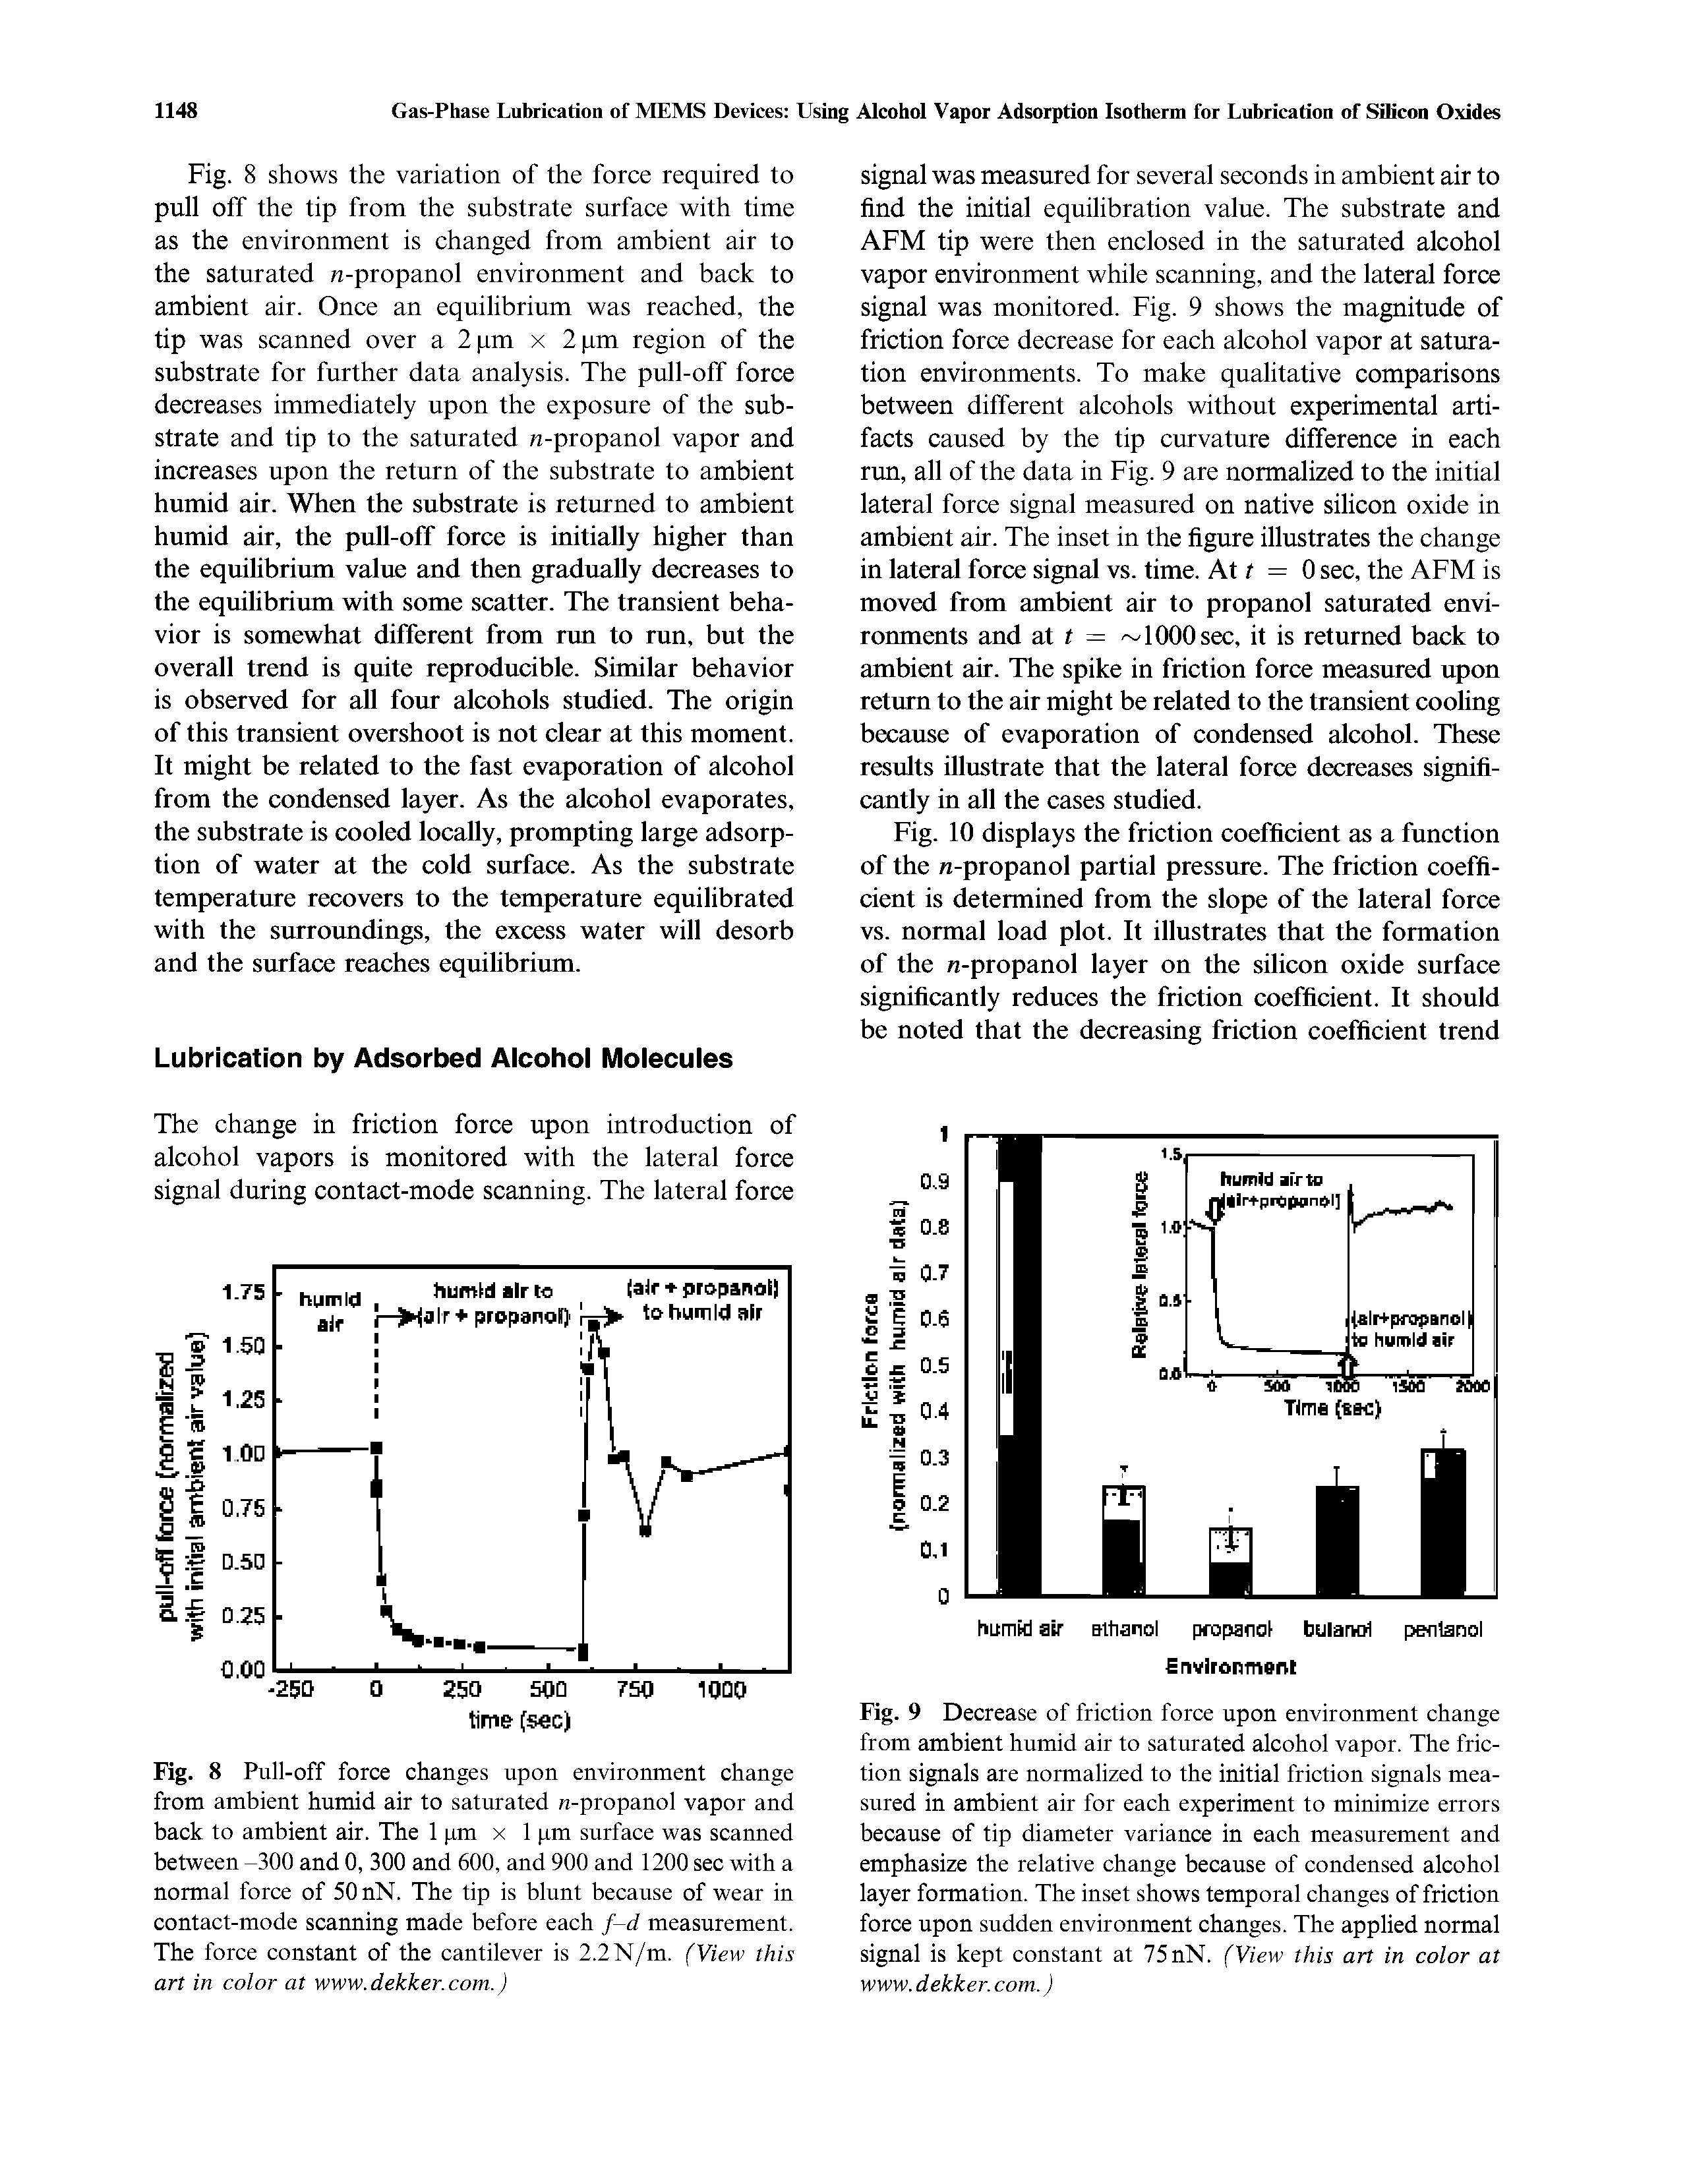 Fig. 9 Decrease of friction force upon environment change from ambient humid air to saturated alcohol vapor. The friction signals are normalized to the initial friction signals measured in ambient air for each experiment to minimize errors because of tip diameter variance in each measurement and emphasize the relative change because of condensed alcohol layer formation. The inset shows temporal changes of friction force upon sudden environment changes. The applied normal signal is kept constant at 75 nN. (View this art in color at WWW. dekker. com.)...